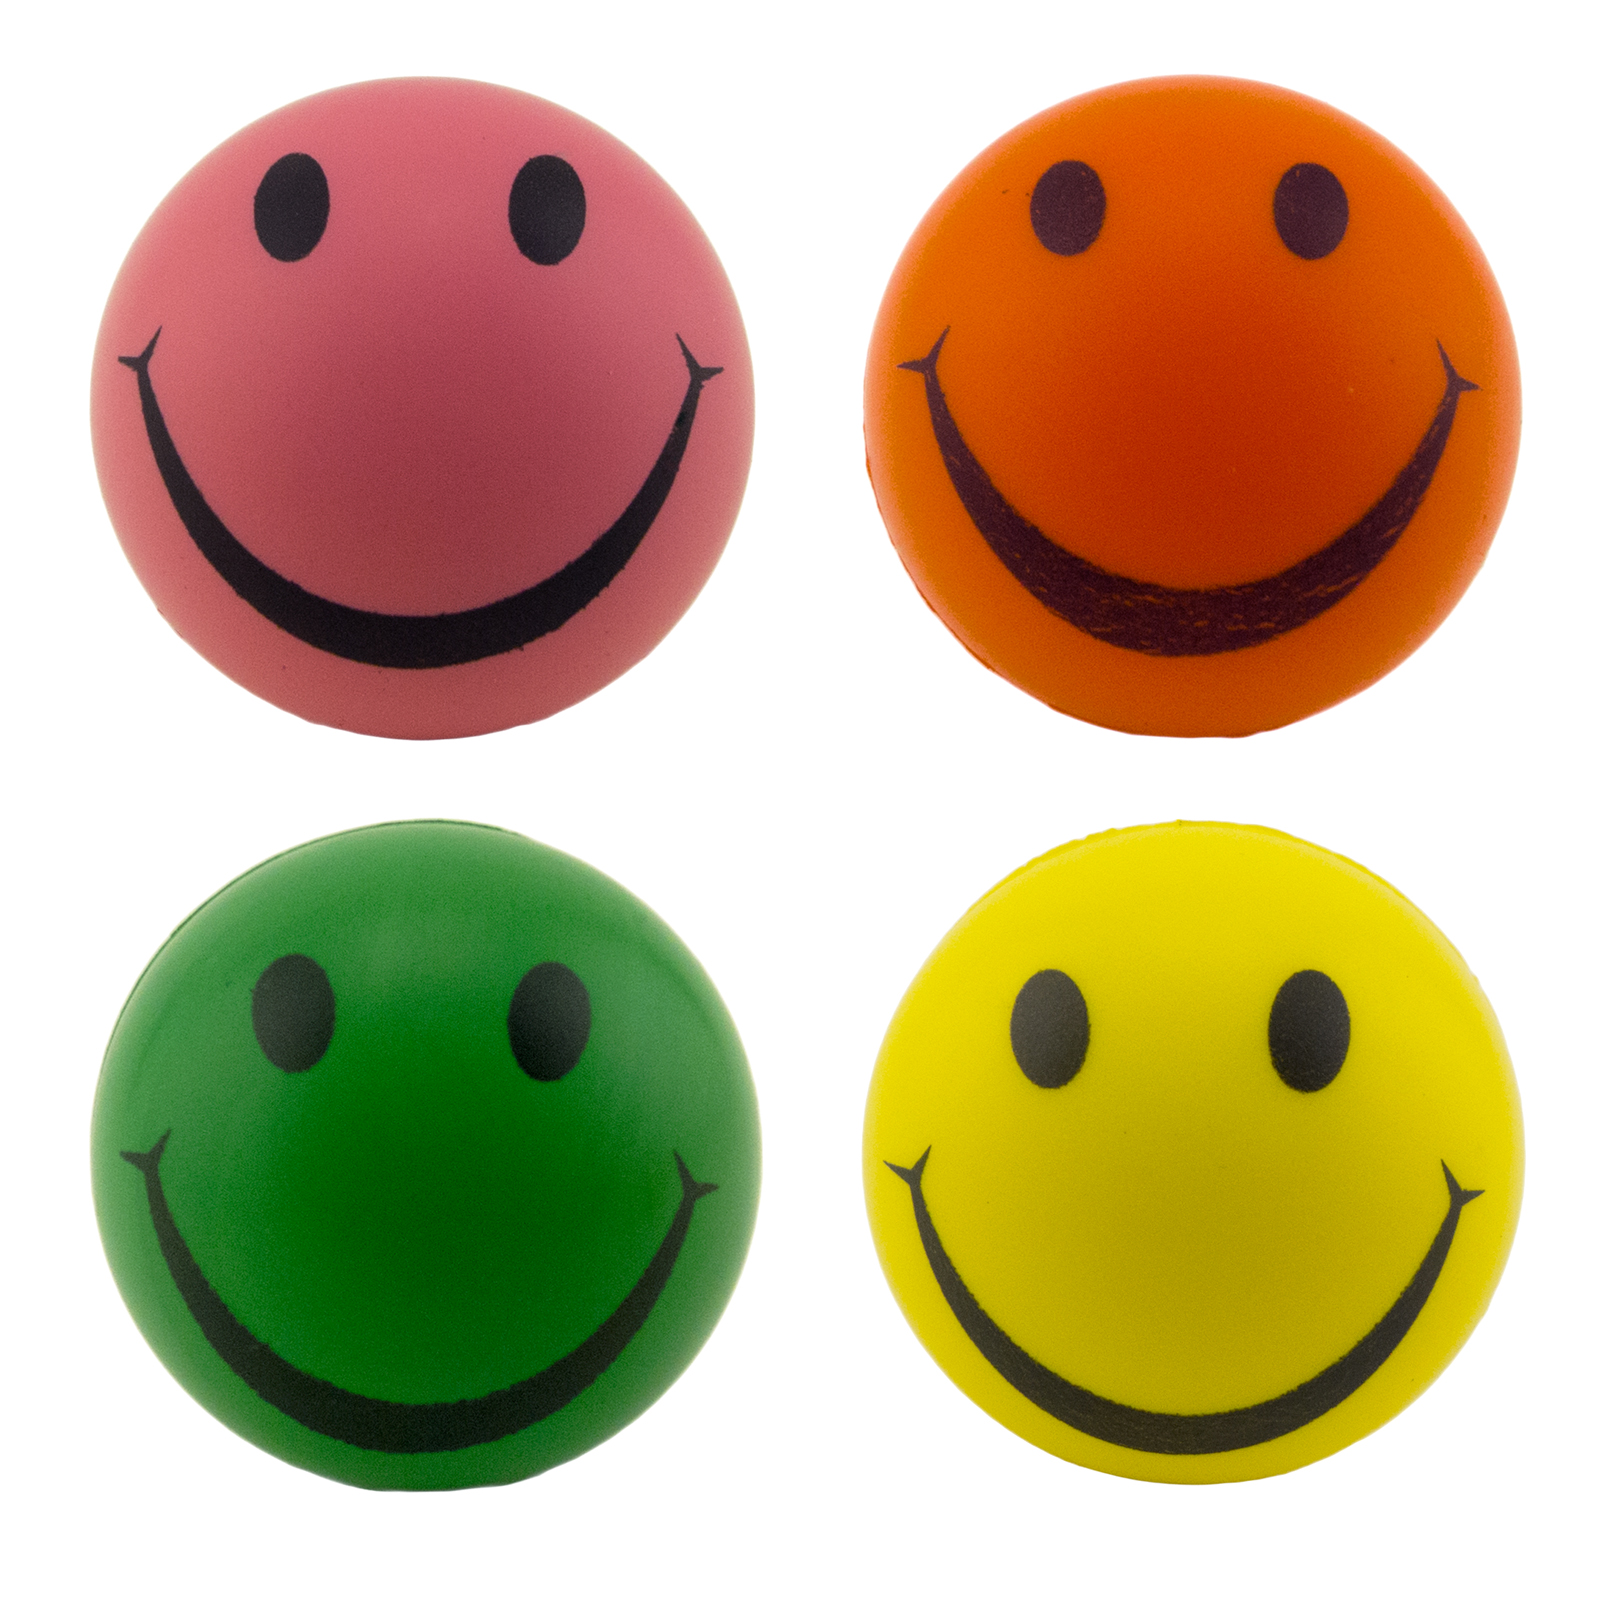 Smile Face Stress Squeeze Balls Assorted Colors 25 Happy Smiley Soft